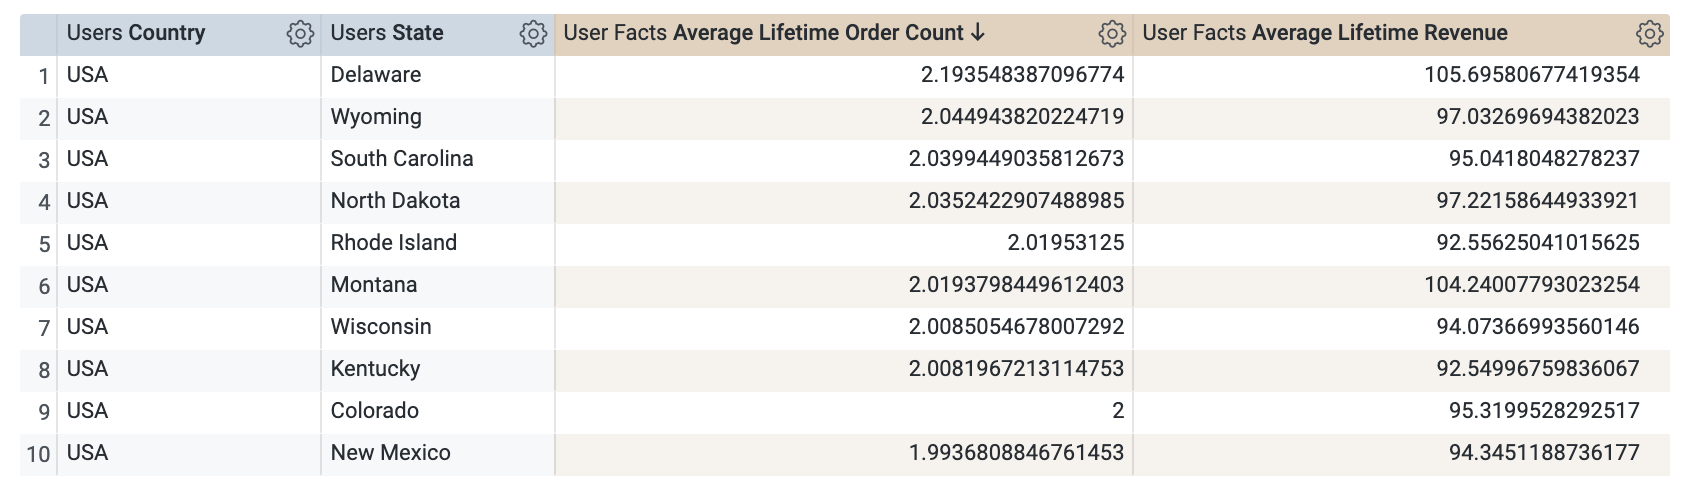 he results table displaying 10 rows of data for Users country, Users state, Average Lifetime Order Count, and Average Lifetime Revenue measures